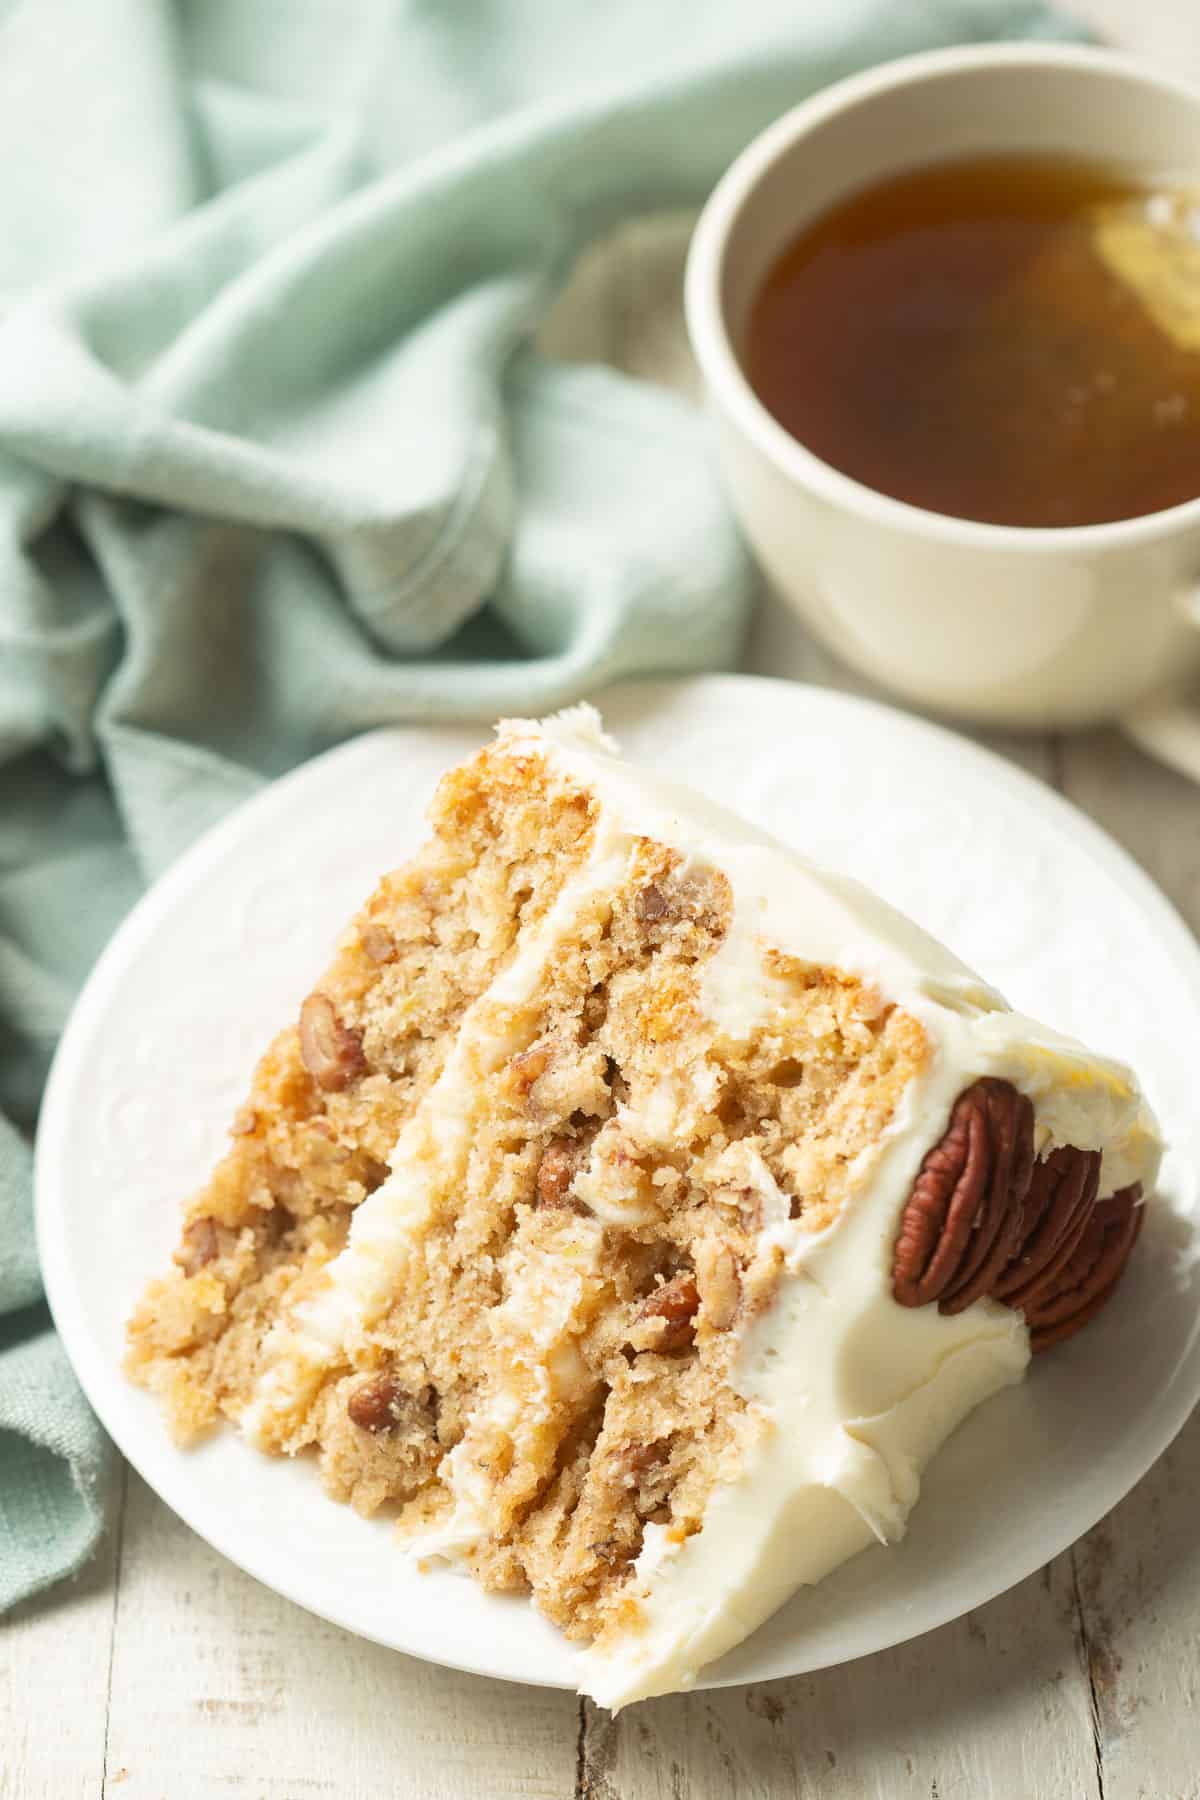 Slice of Vegan Hummingbird Cake on a plate with a tea cup in the background.